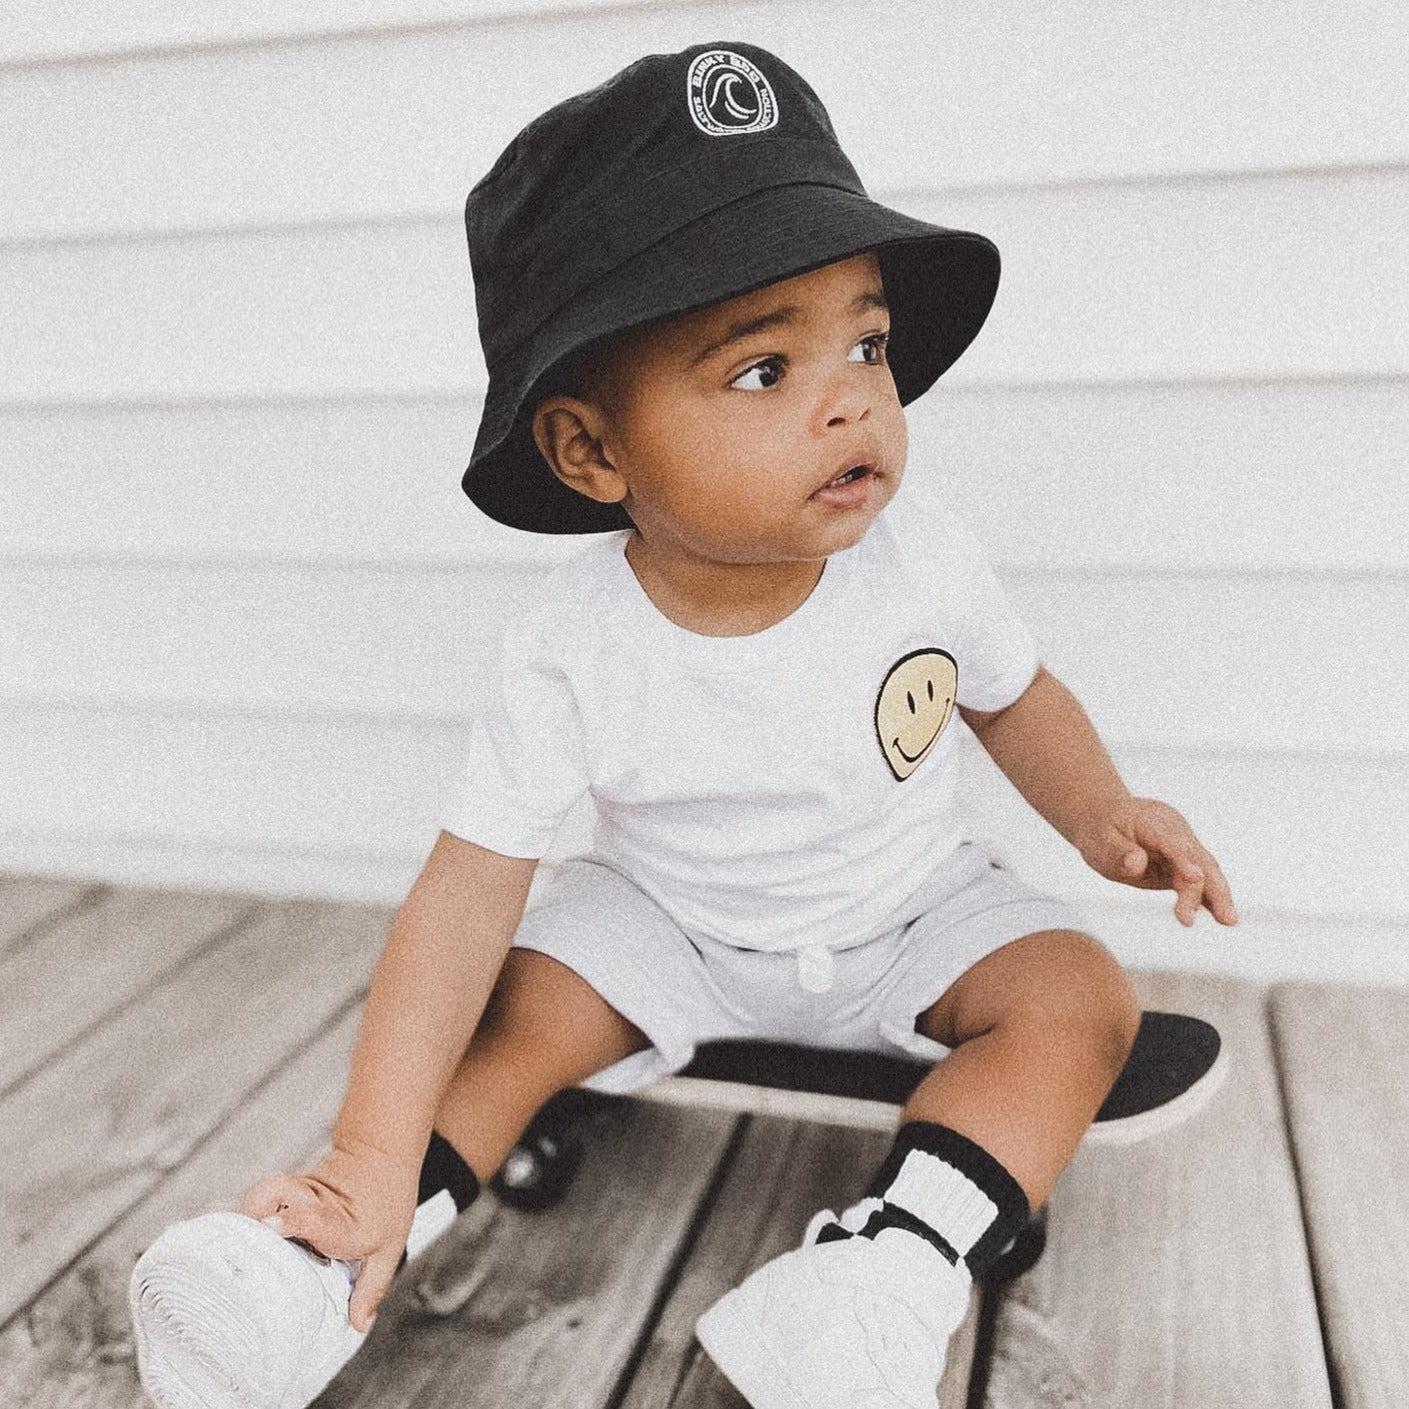 Toddler, Infant, And Baby Hats And Apparel – Binkybro